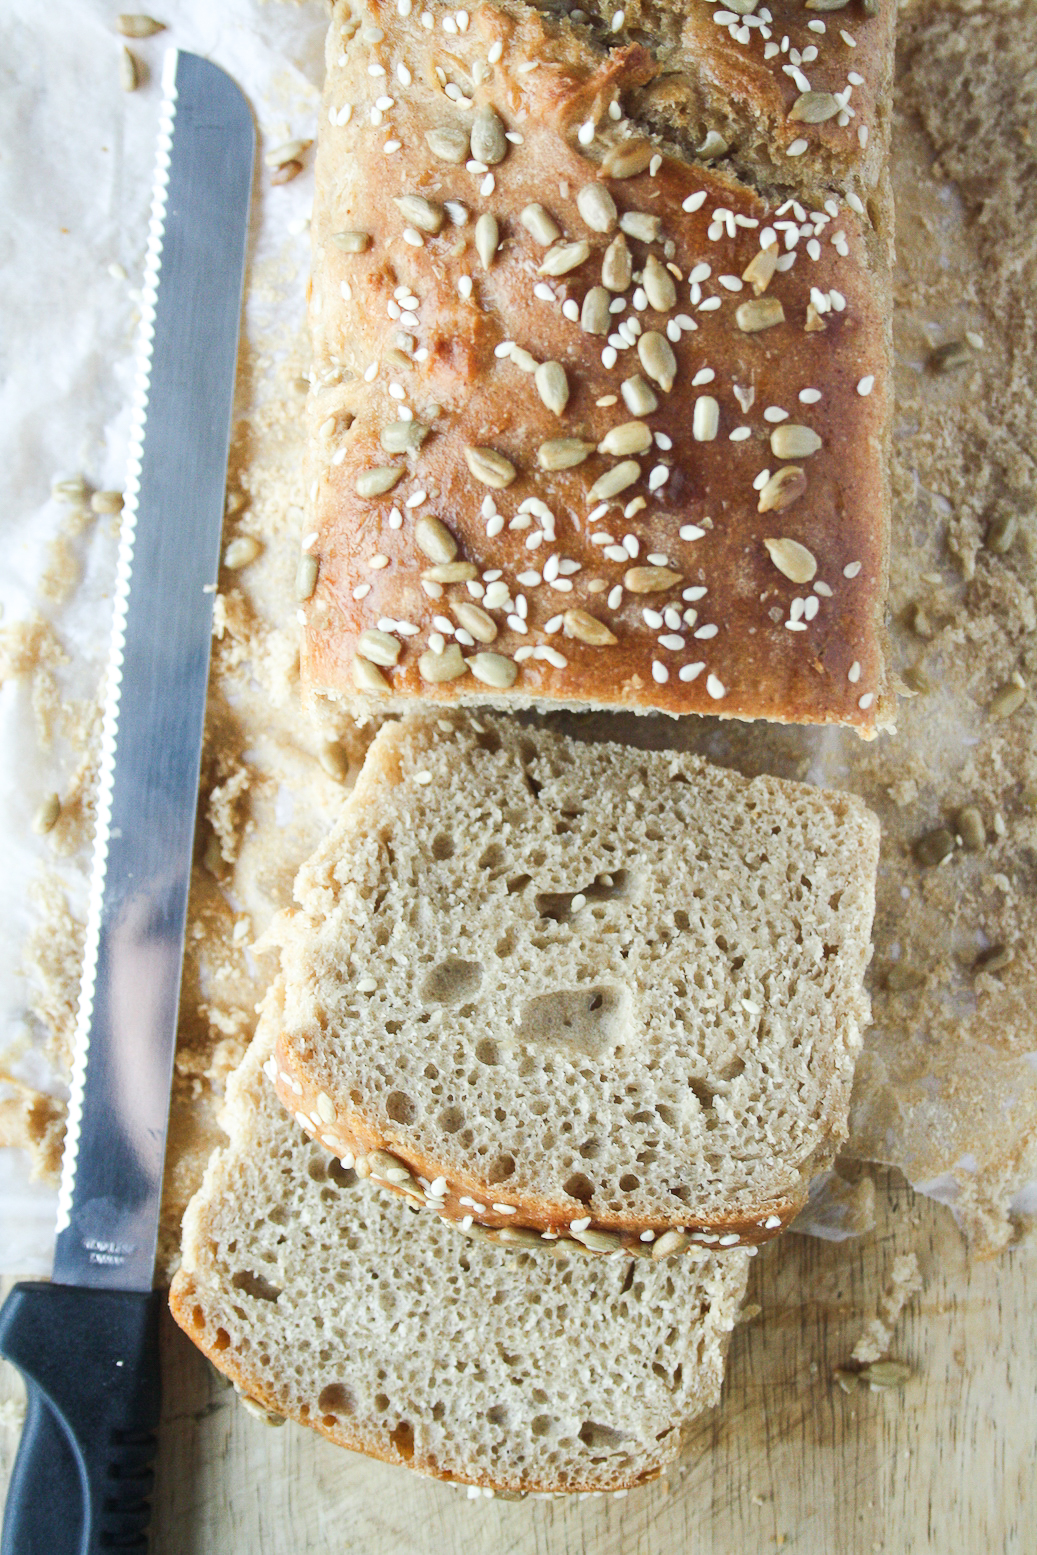 Soft and chewy homemade rye bread topped with sesame and sunflower seeds.